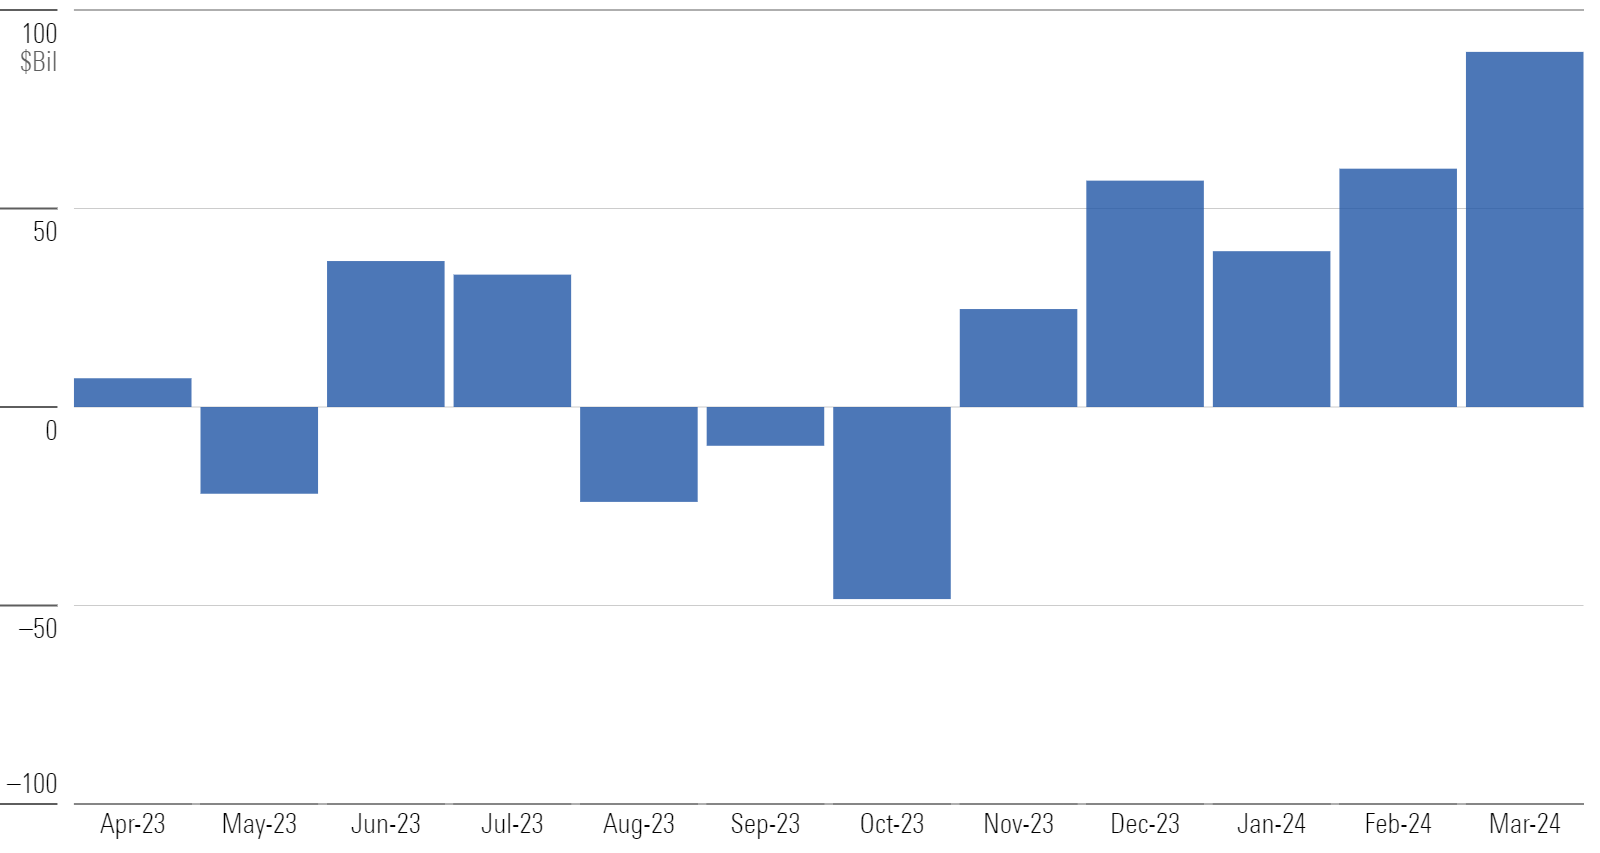 A bar chart of US fund flows from April 2023 through March 2024.